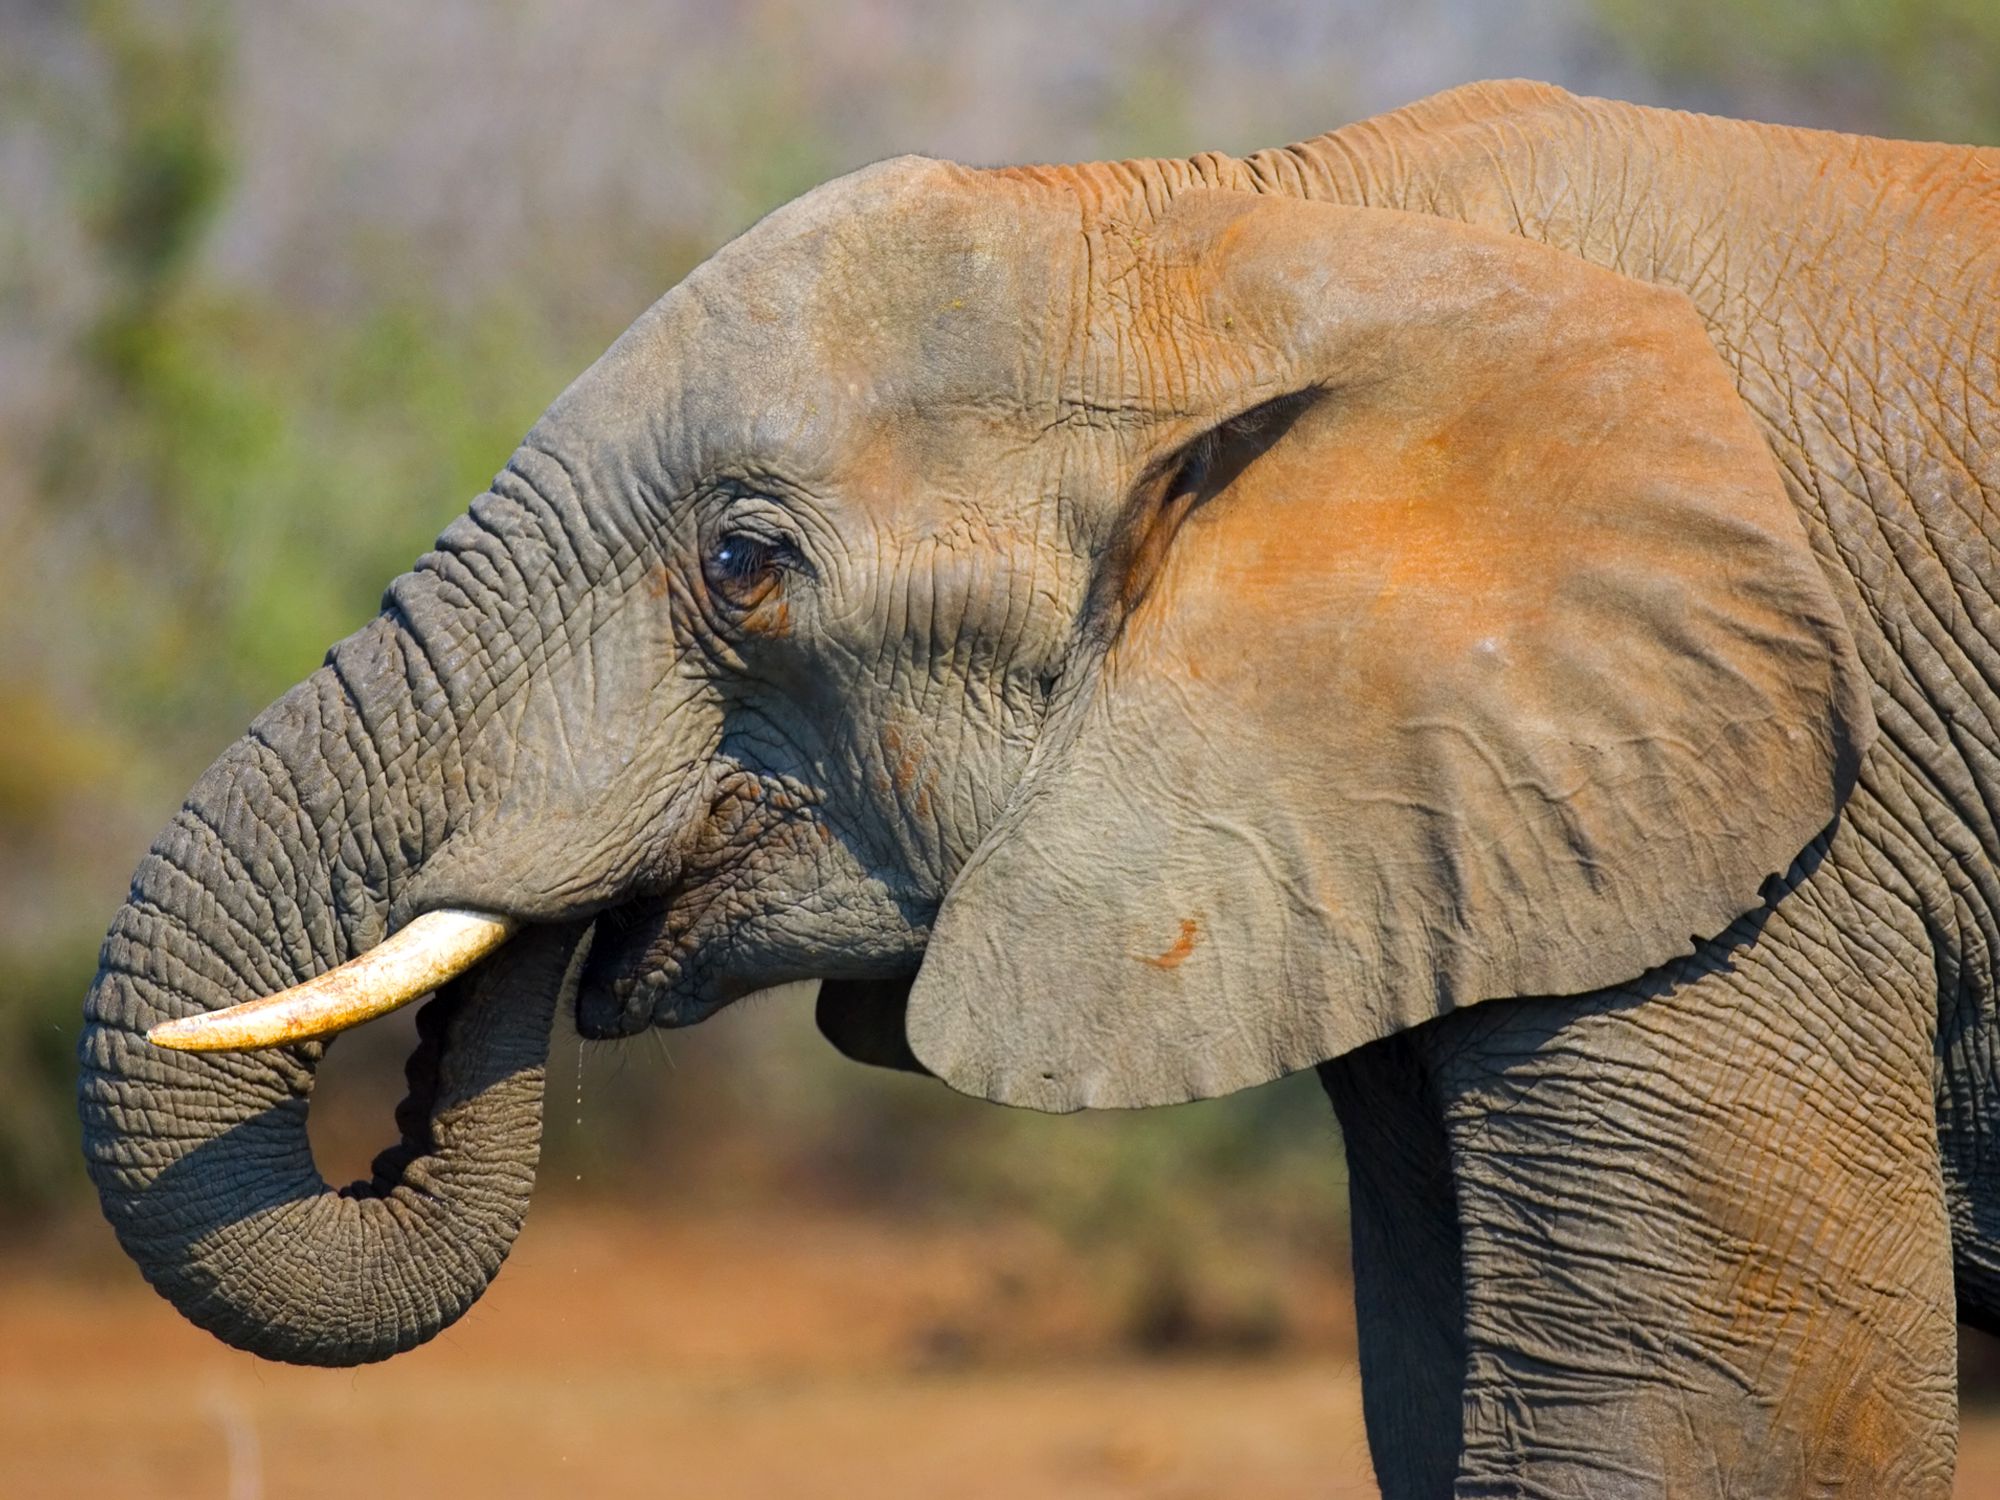 What do elephants use their trunk for?